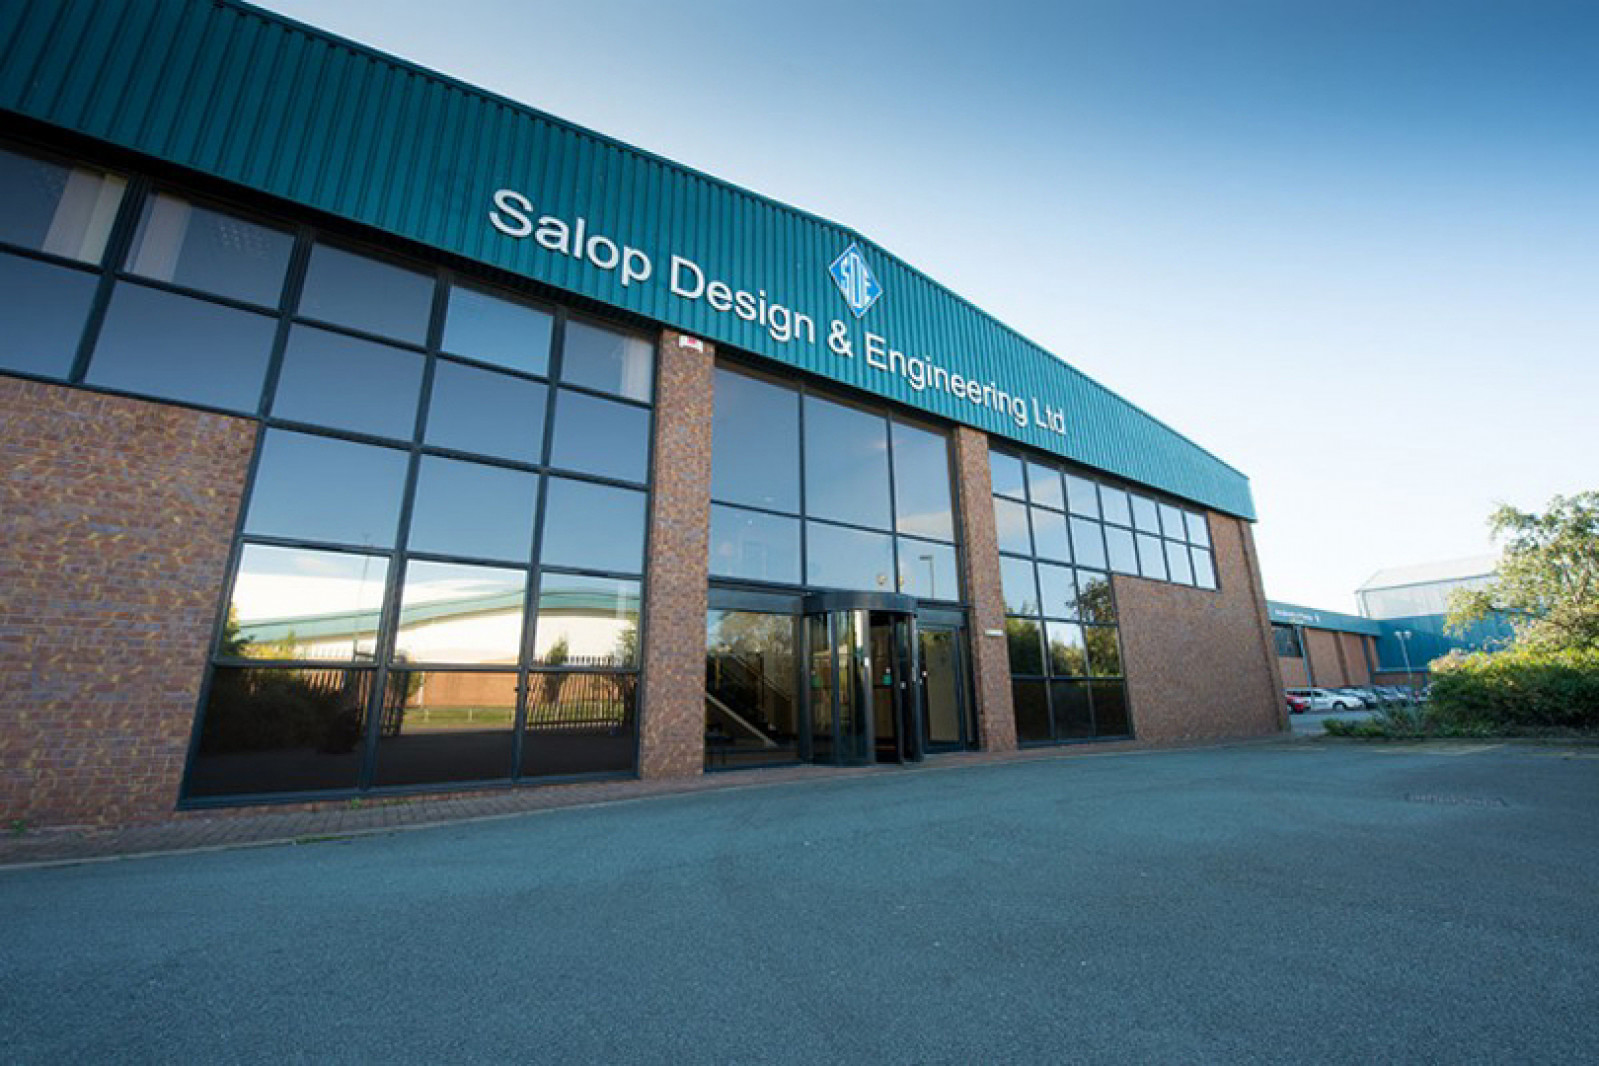 Salop Design & Engineering urges more Young People to join the Sector